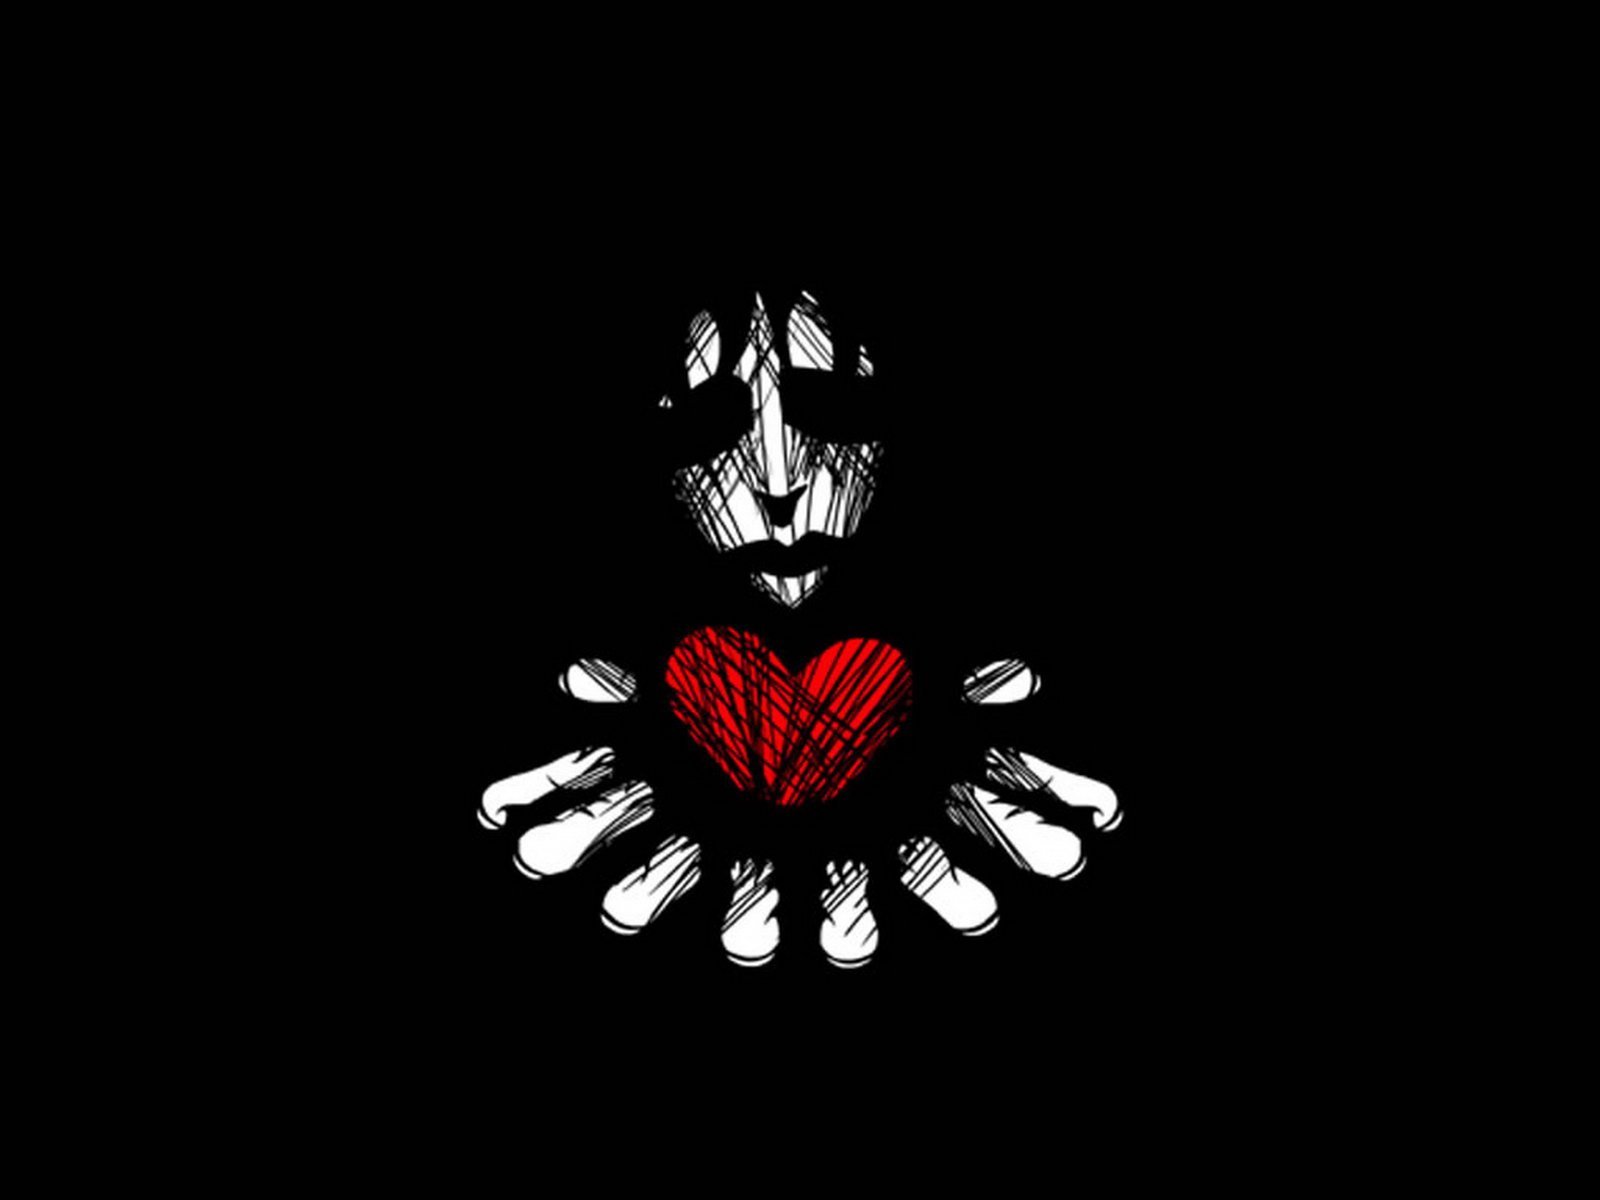 EMO Heart Wallpaper | Emo Wallpapers | EMO Pictures